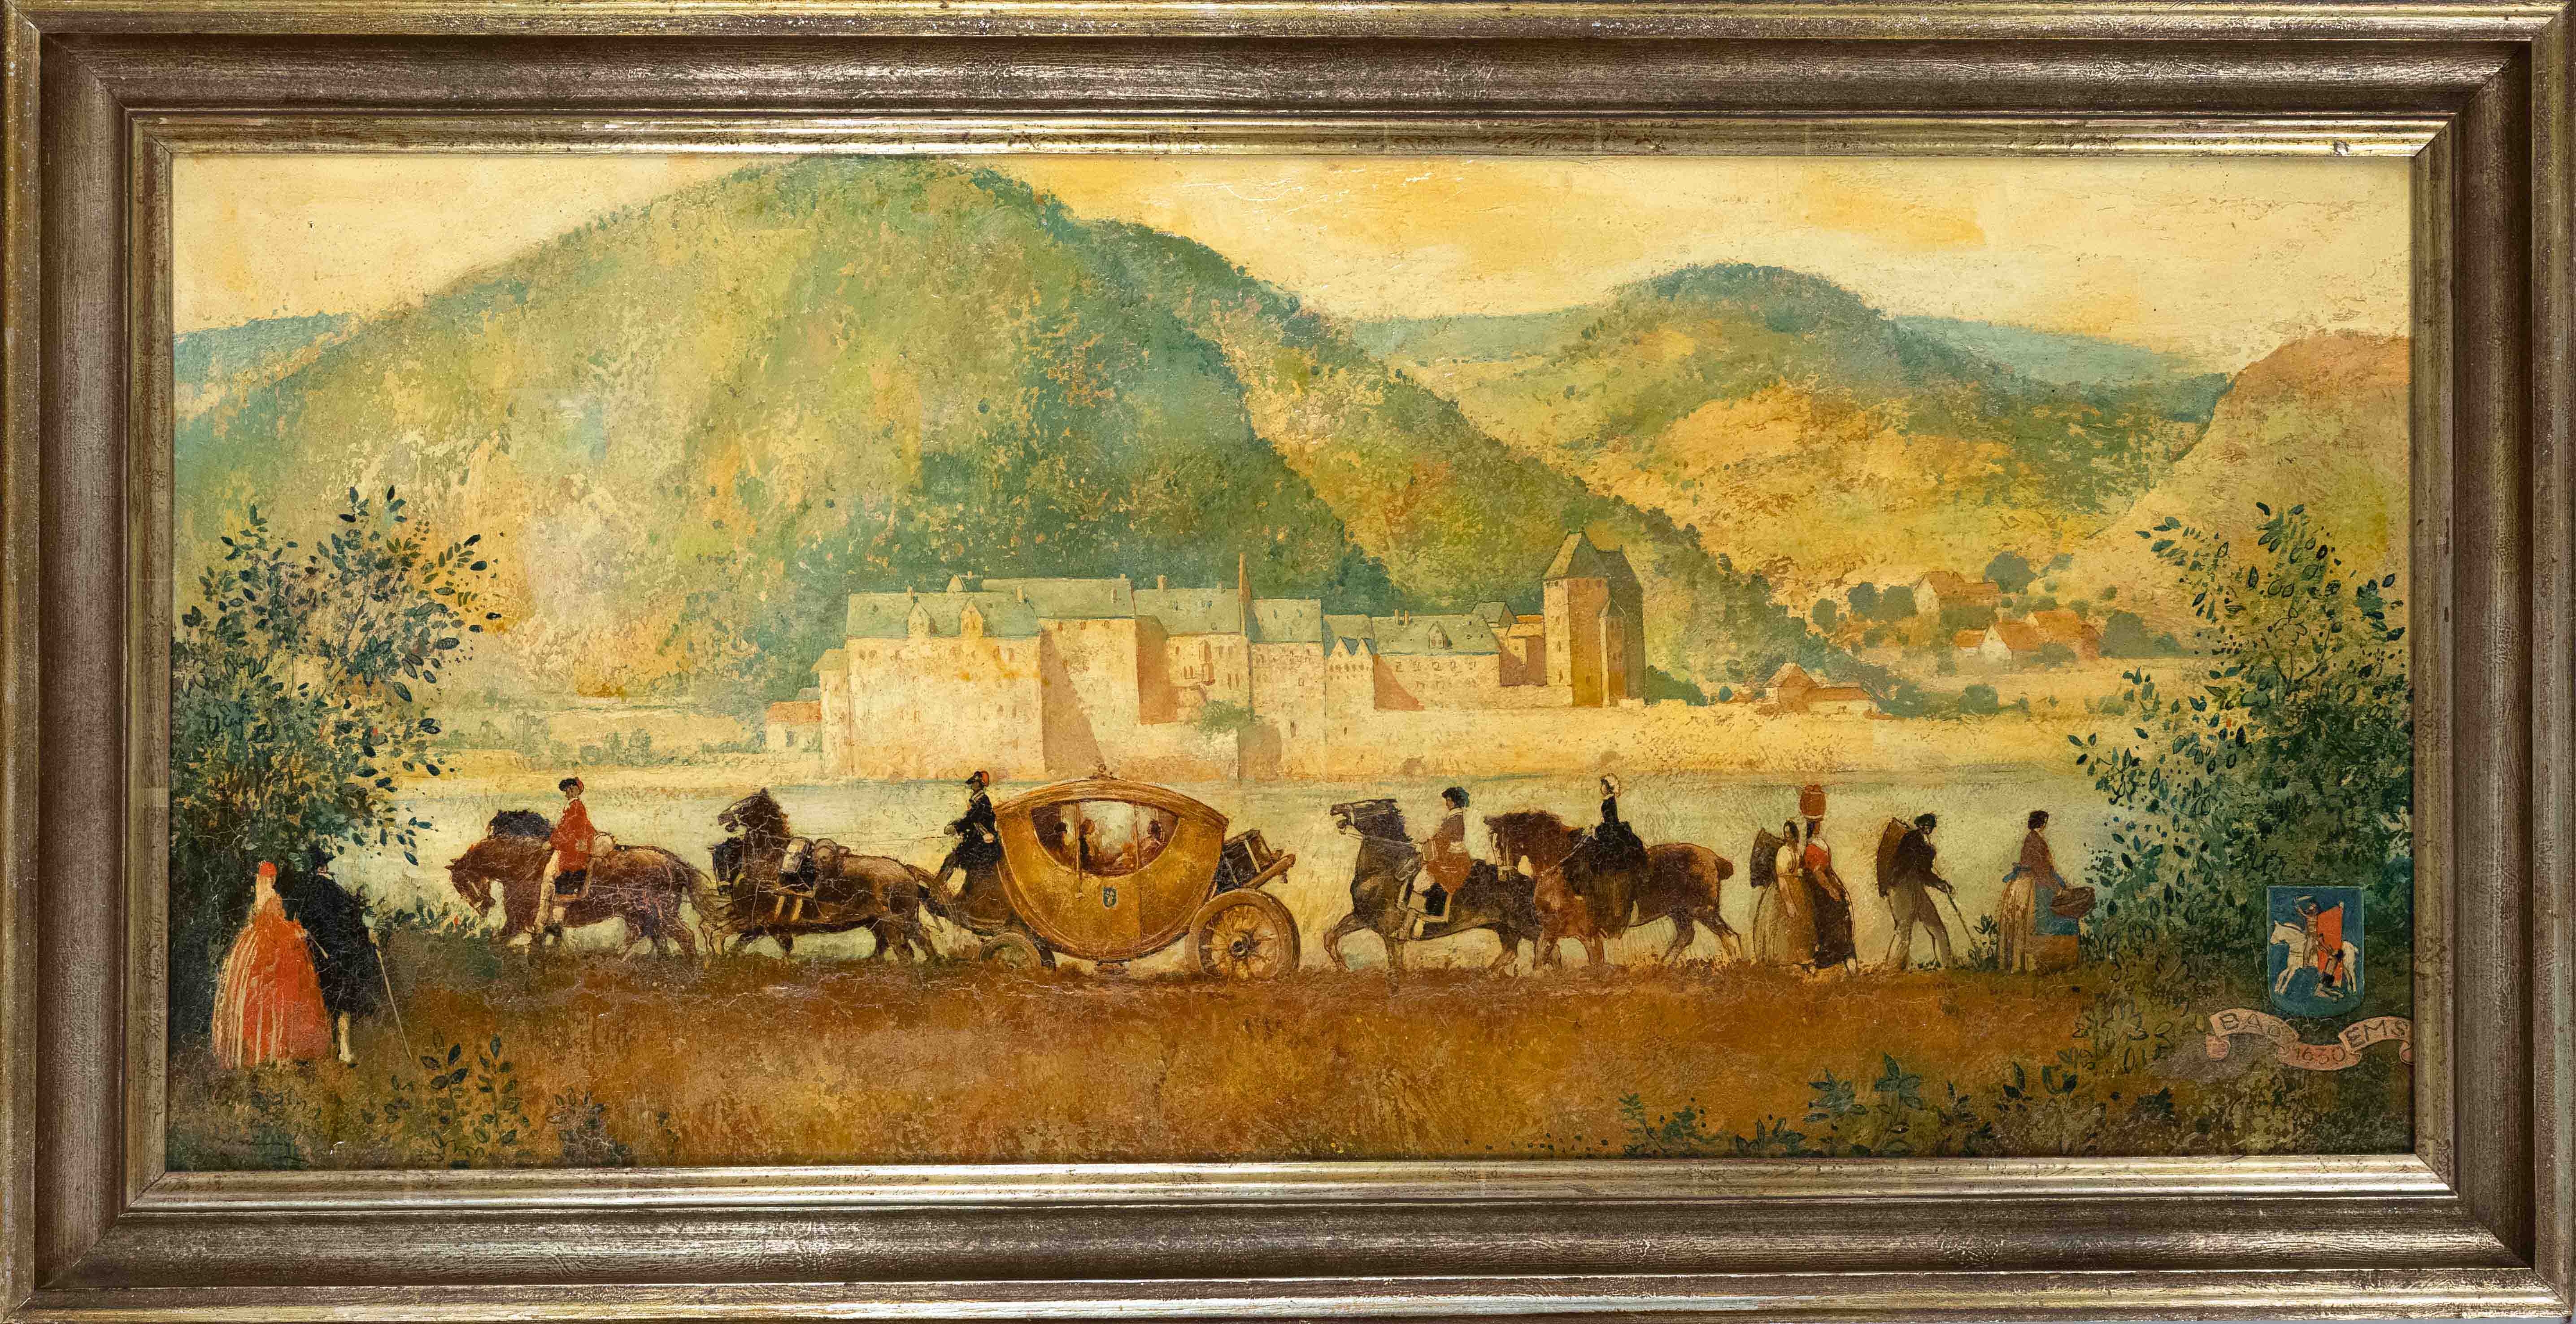 Unidentified painter c. 1930, view of Bad Ems in 1630 with a round dance of various figures in the